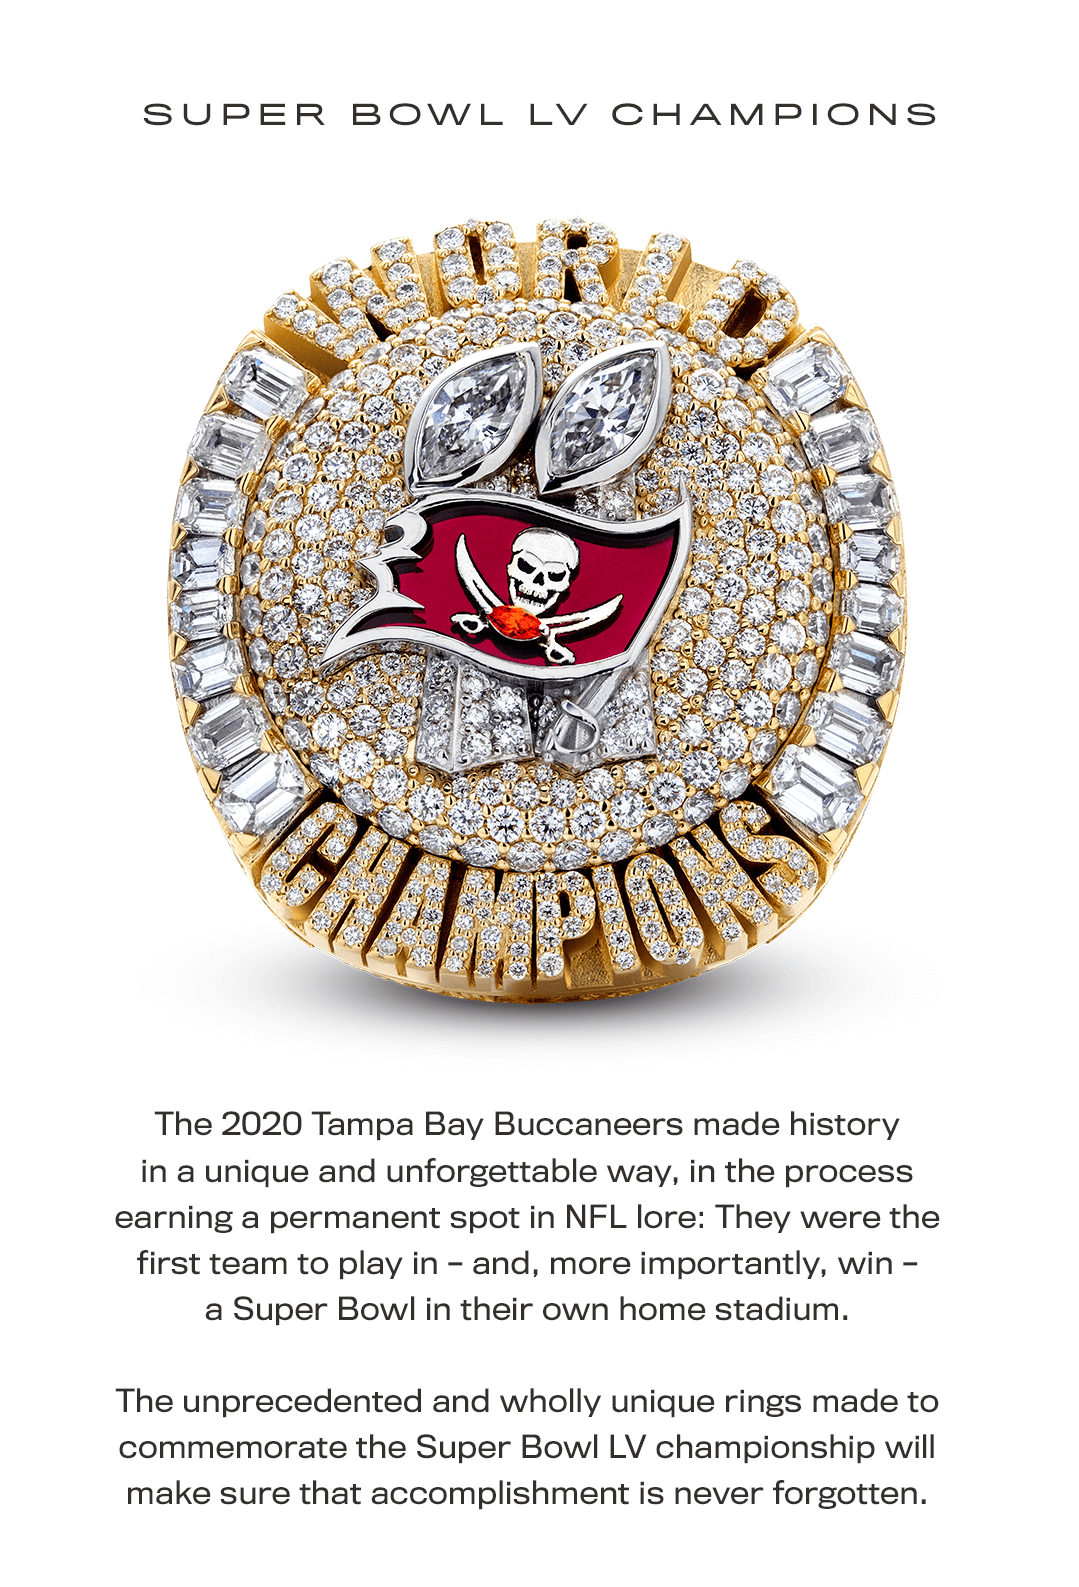 The 2020 Tampa Bay Buccaneers made history in a unique and unforgettable way, in the process earning a permanent spot in NFL lore: They were the first team to play in – and, more importantly, win – a Super Bowl in their own home stadium. The unprecedented and wholly unique rings made to commemorate the Super Bowl LV championship will make sure that accomplishment is never forgotten.